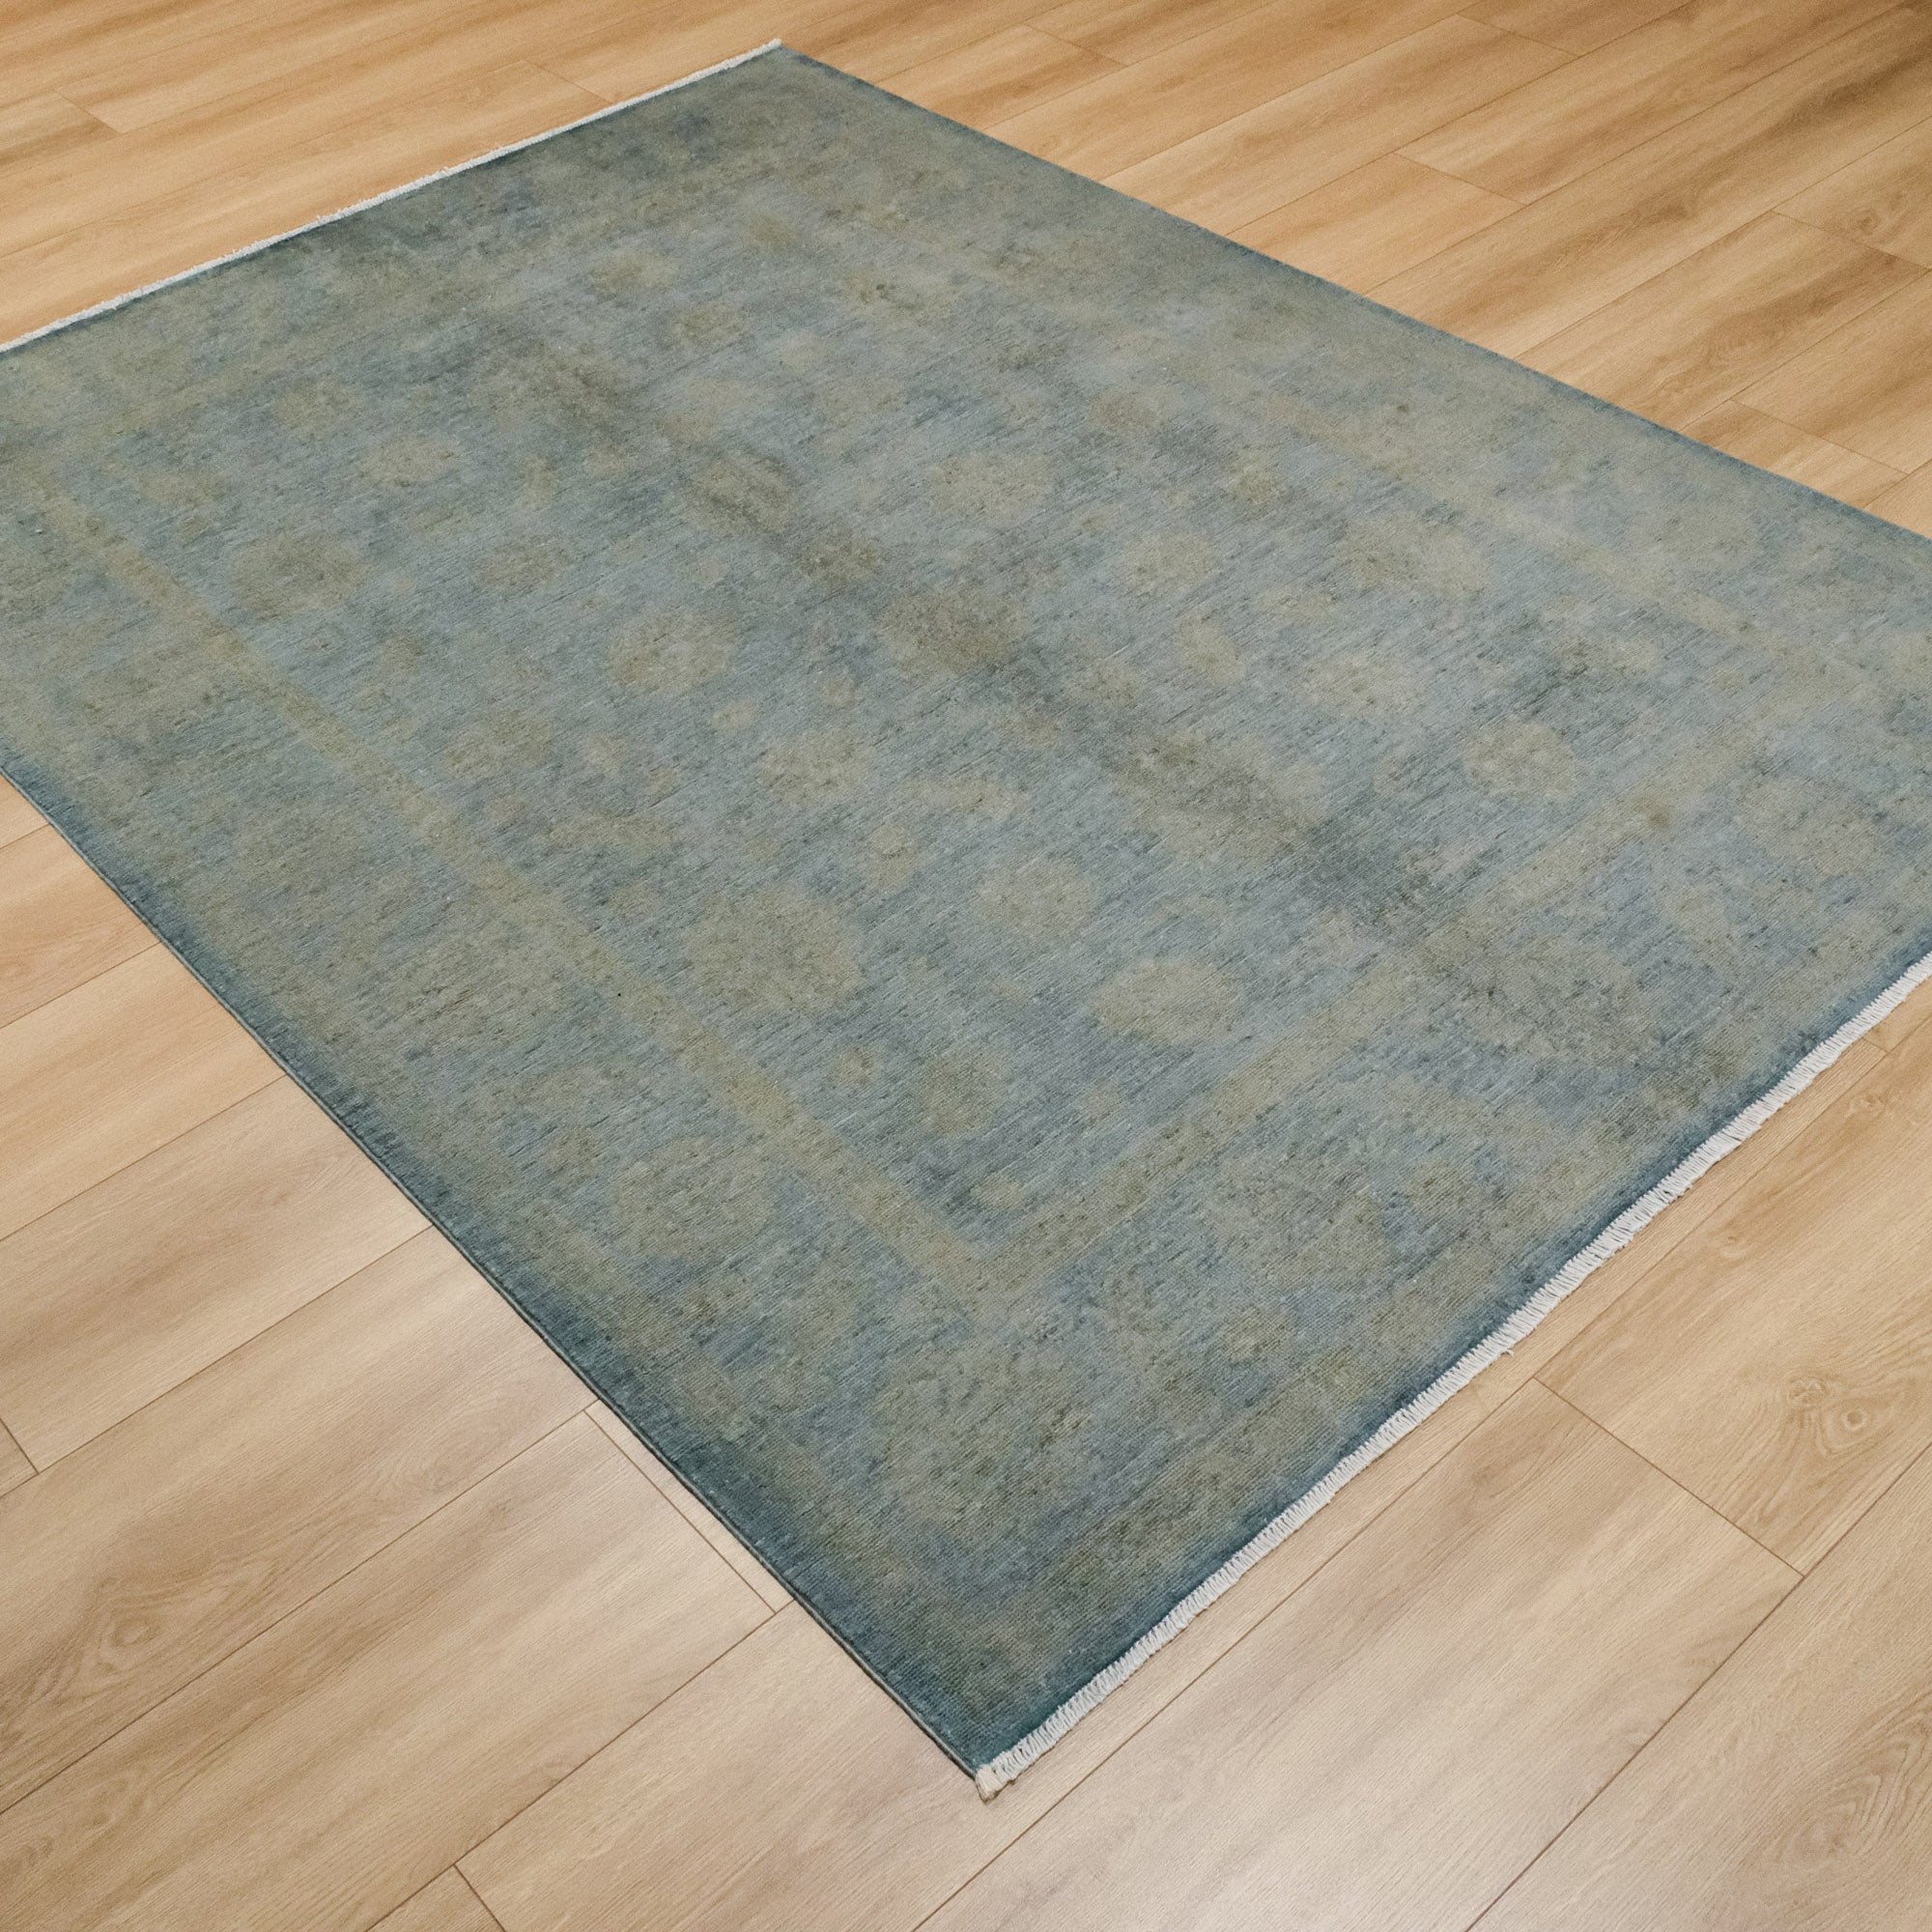 Retro Series Hand-Woven Vintage Patterned Green Wool Carpet